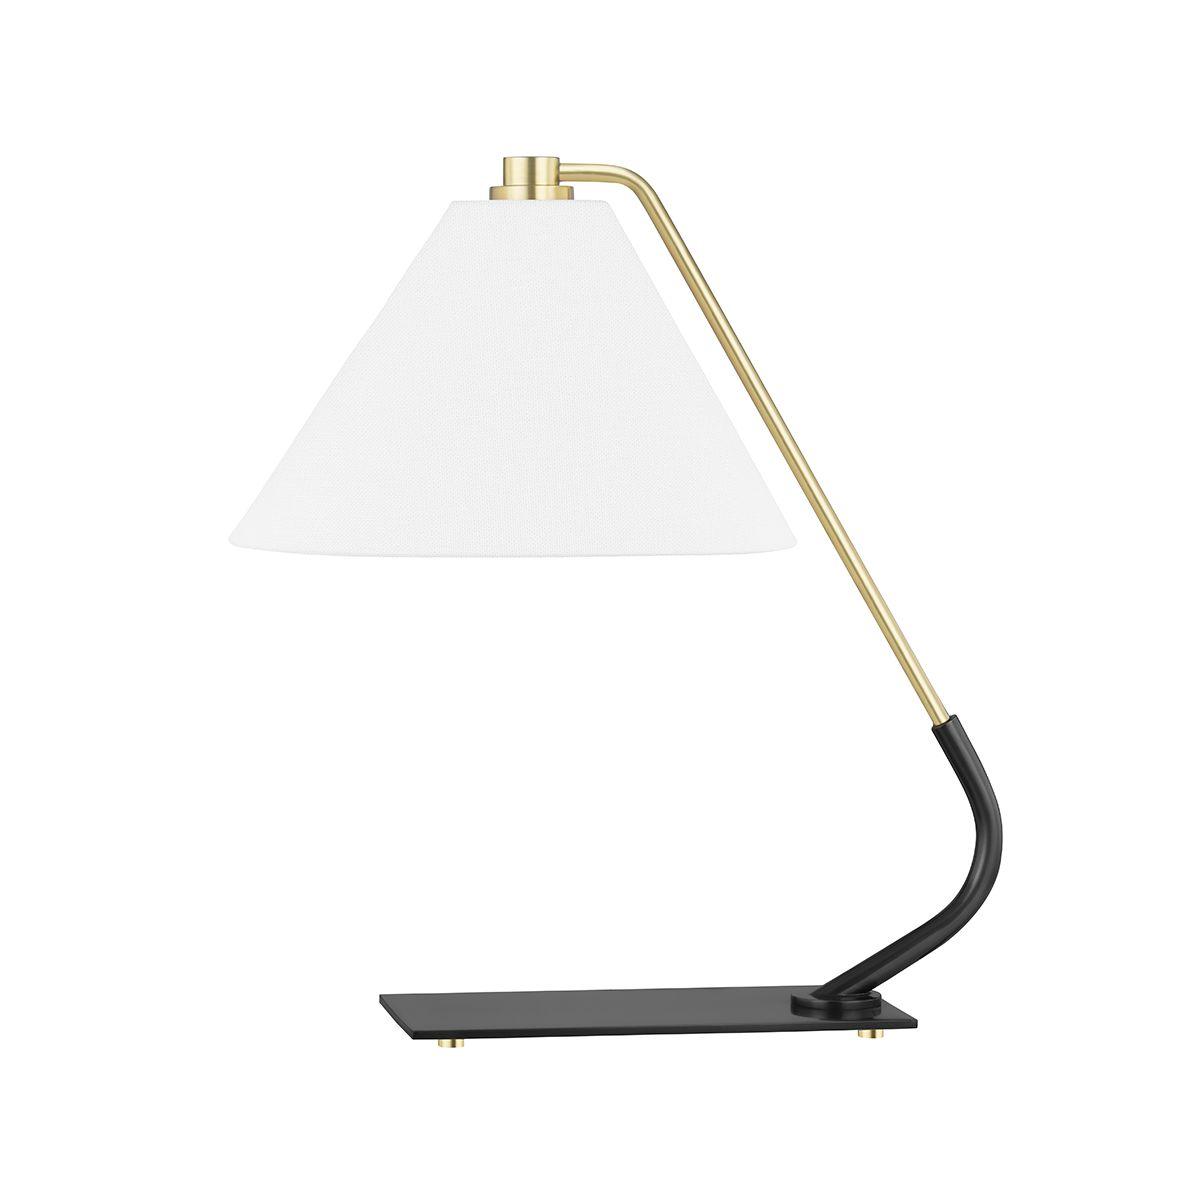 Danby Table Lamp Aged Old Bronze Finish